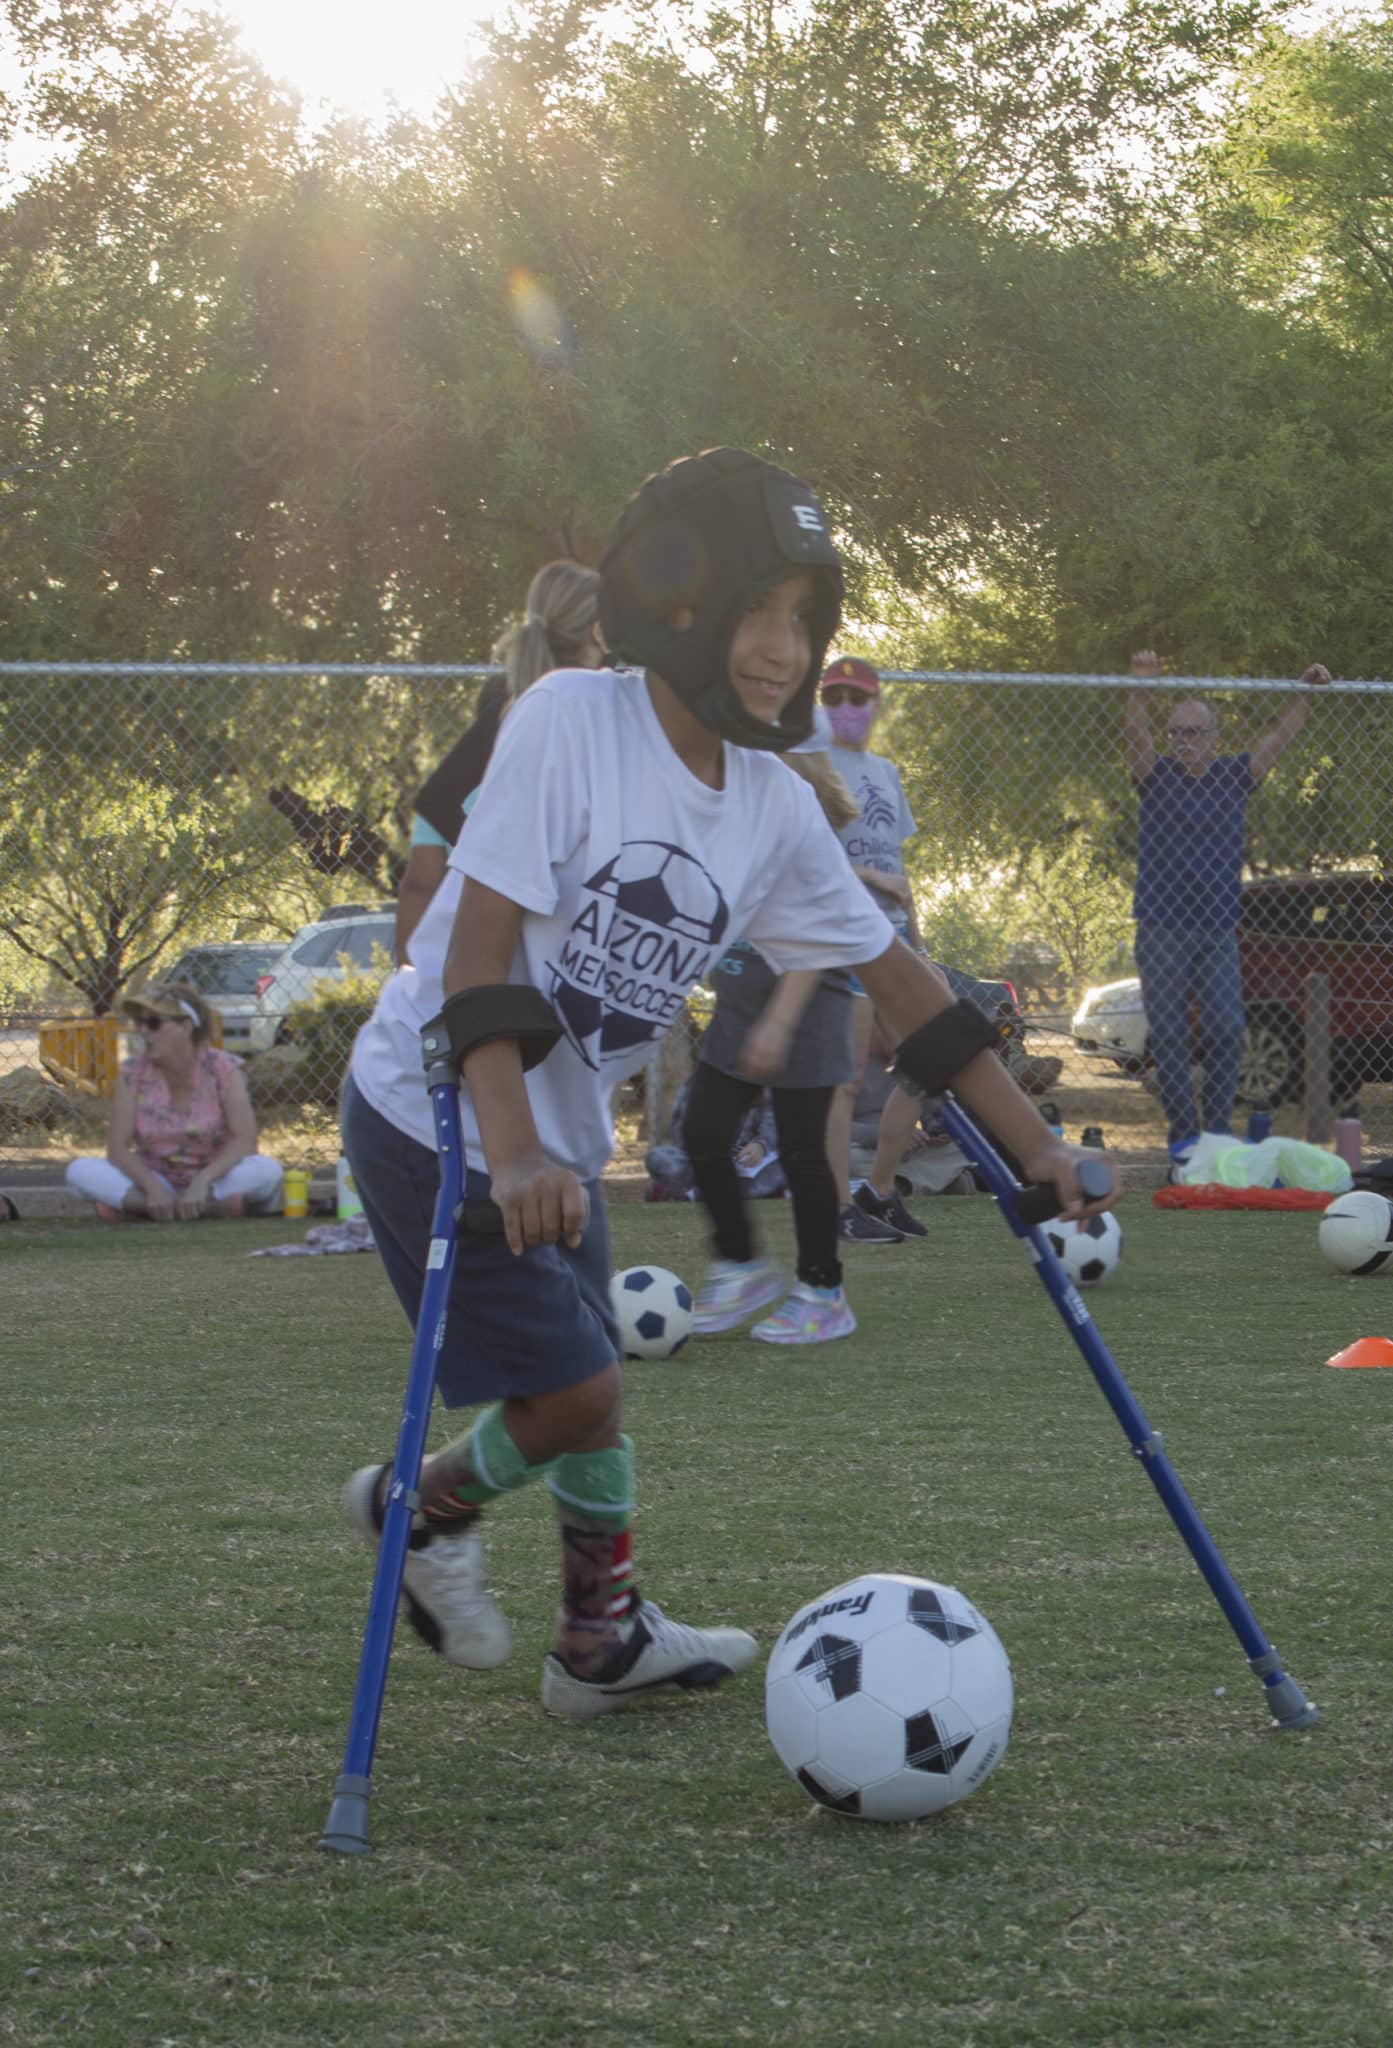 Boy playing soccer while using assistive devices for his legs